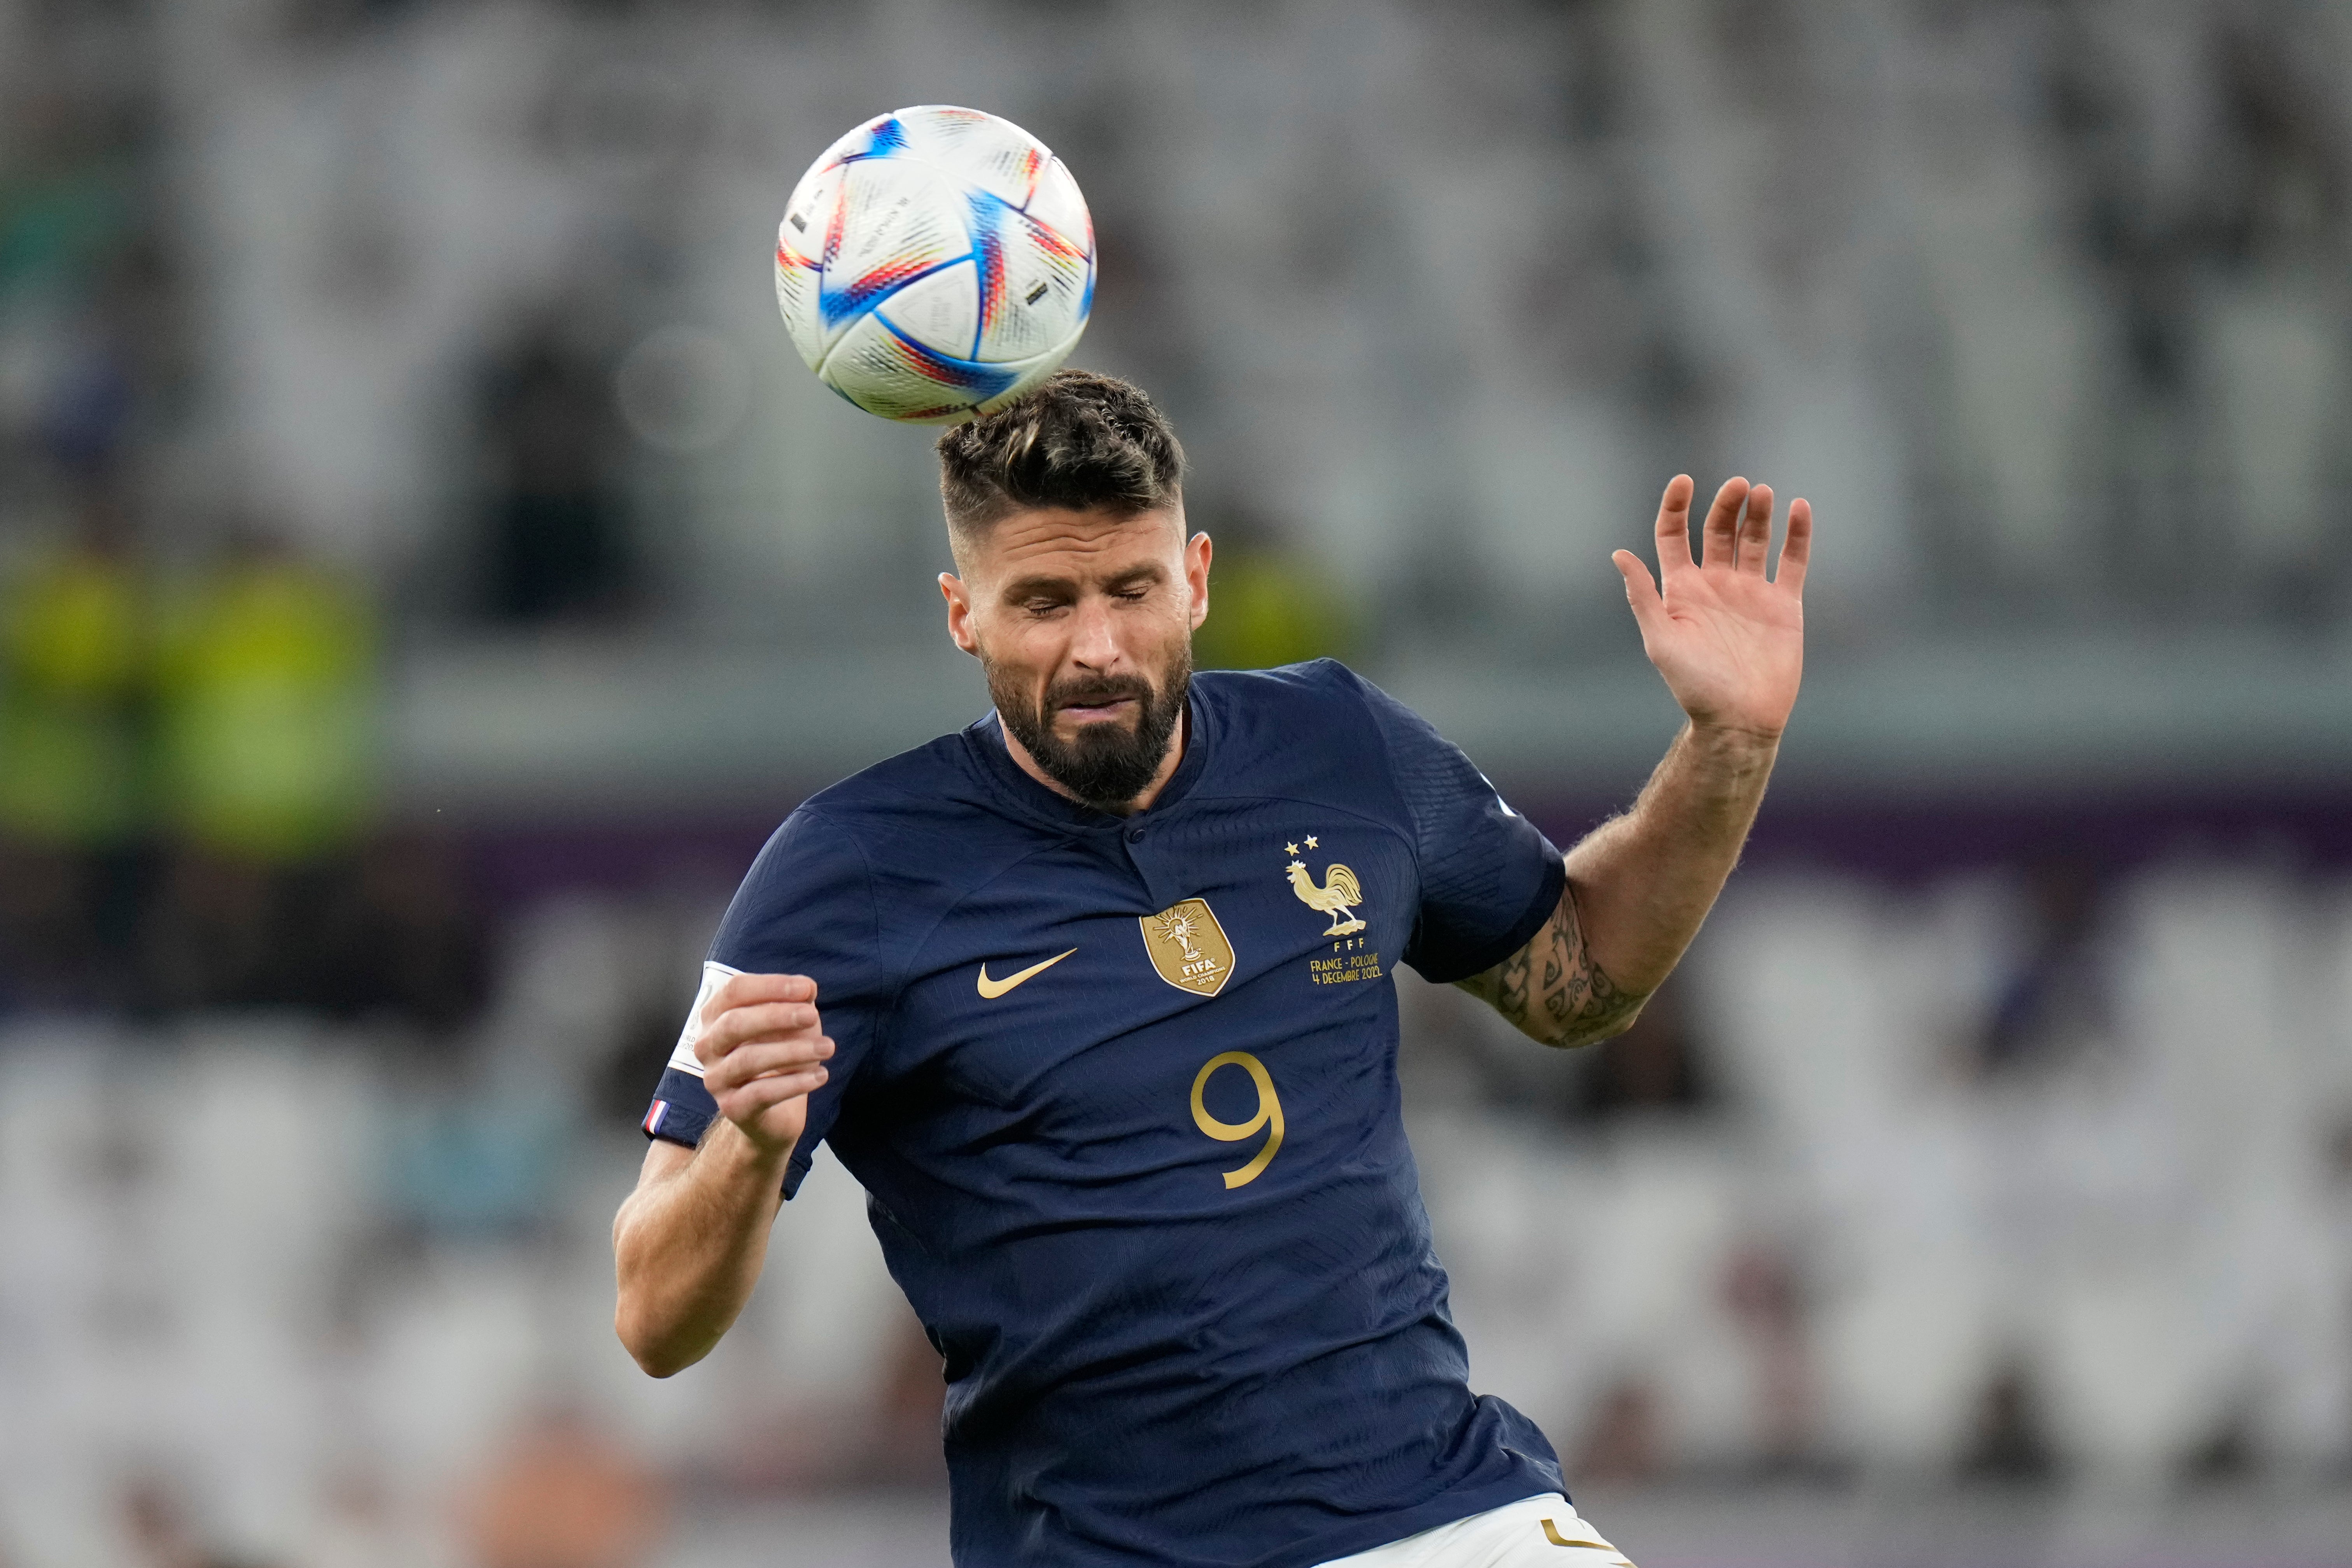 Olivier Giroud’s physical presence up front has helped unlock Mbappe